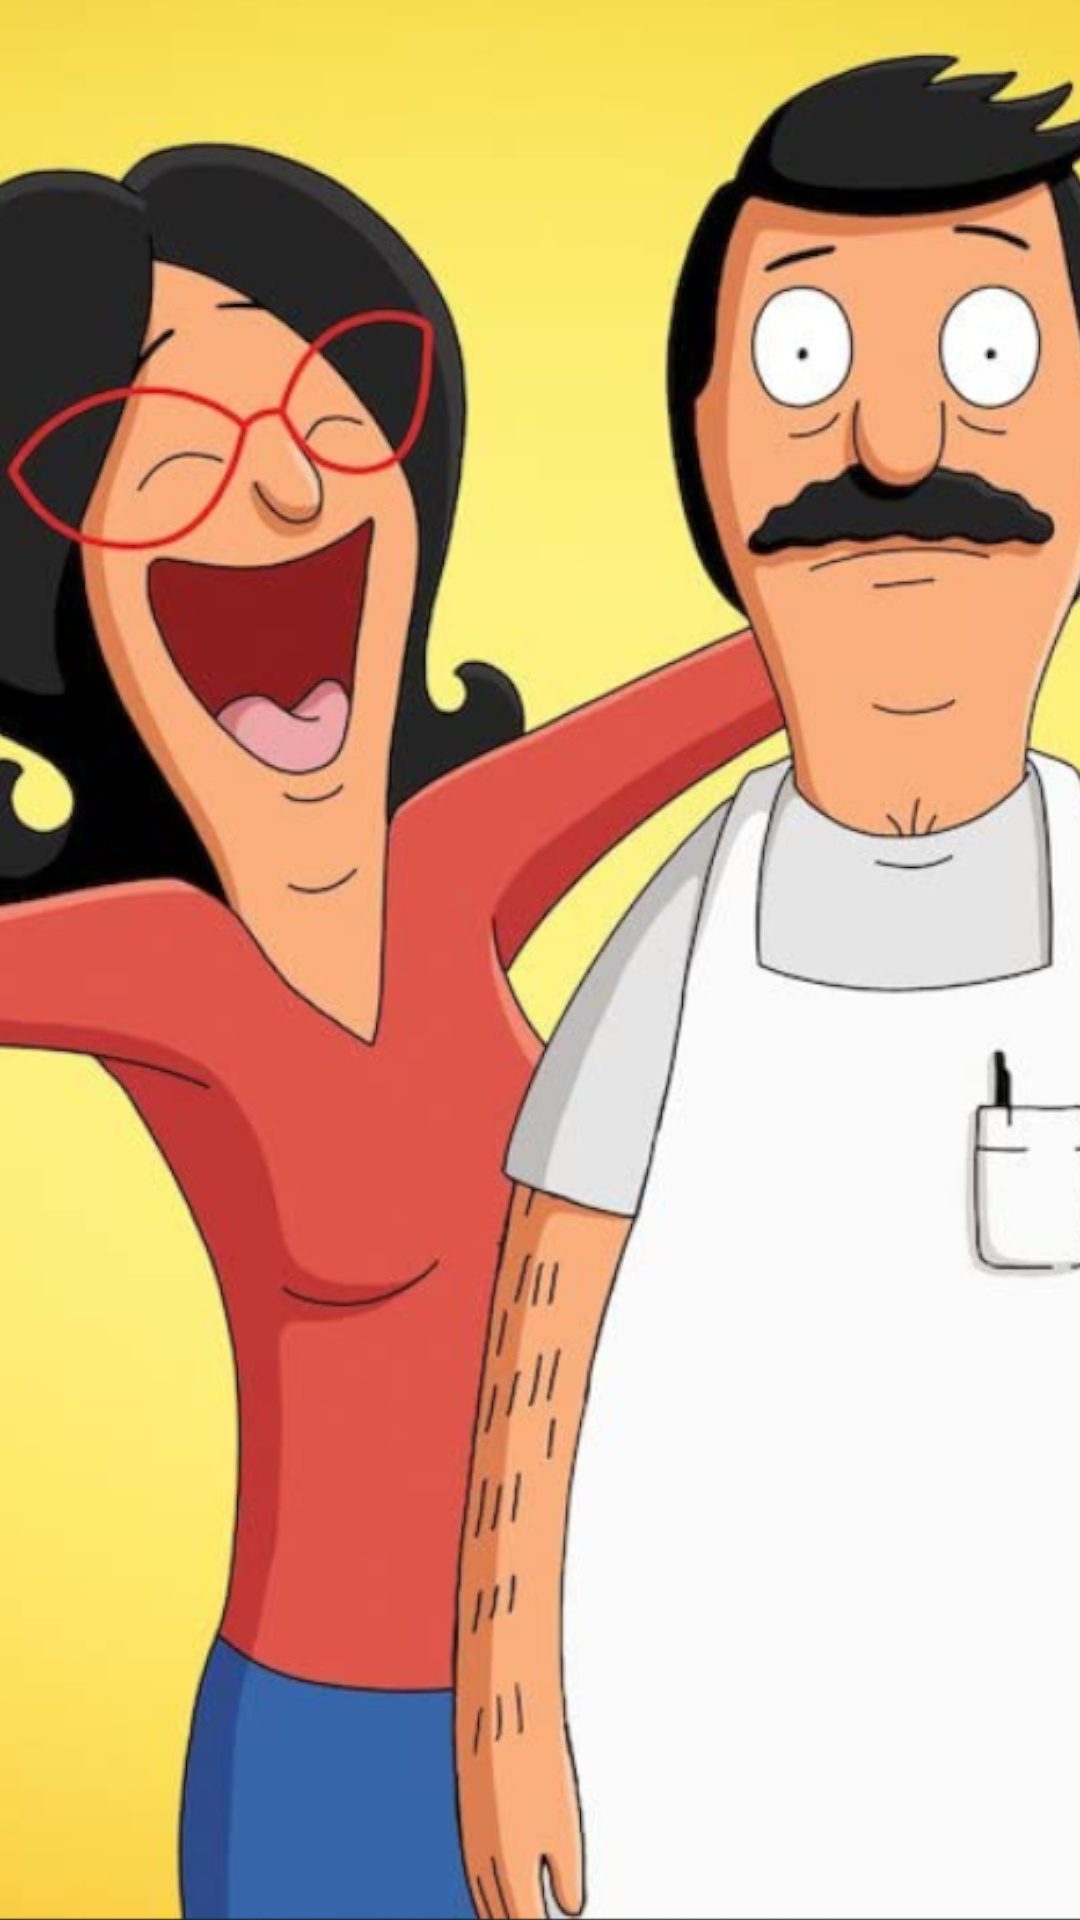 Bob Glued to the Toilet Bobs Burgers in Vinny Ls AnimeAnimated  Collection Comic Art Gallery Room